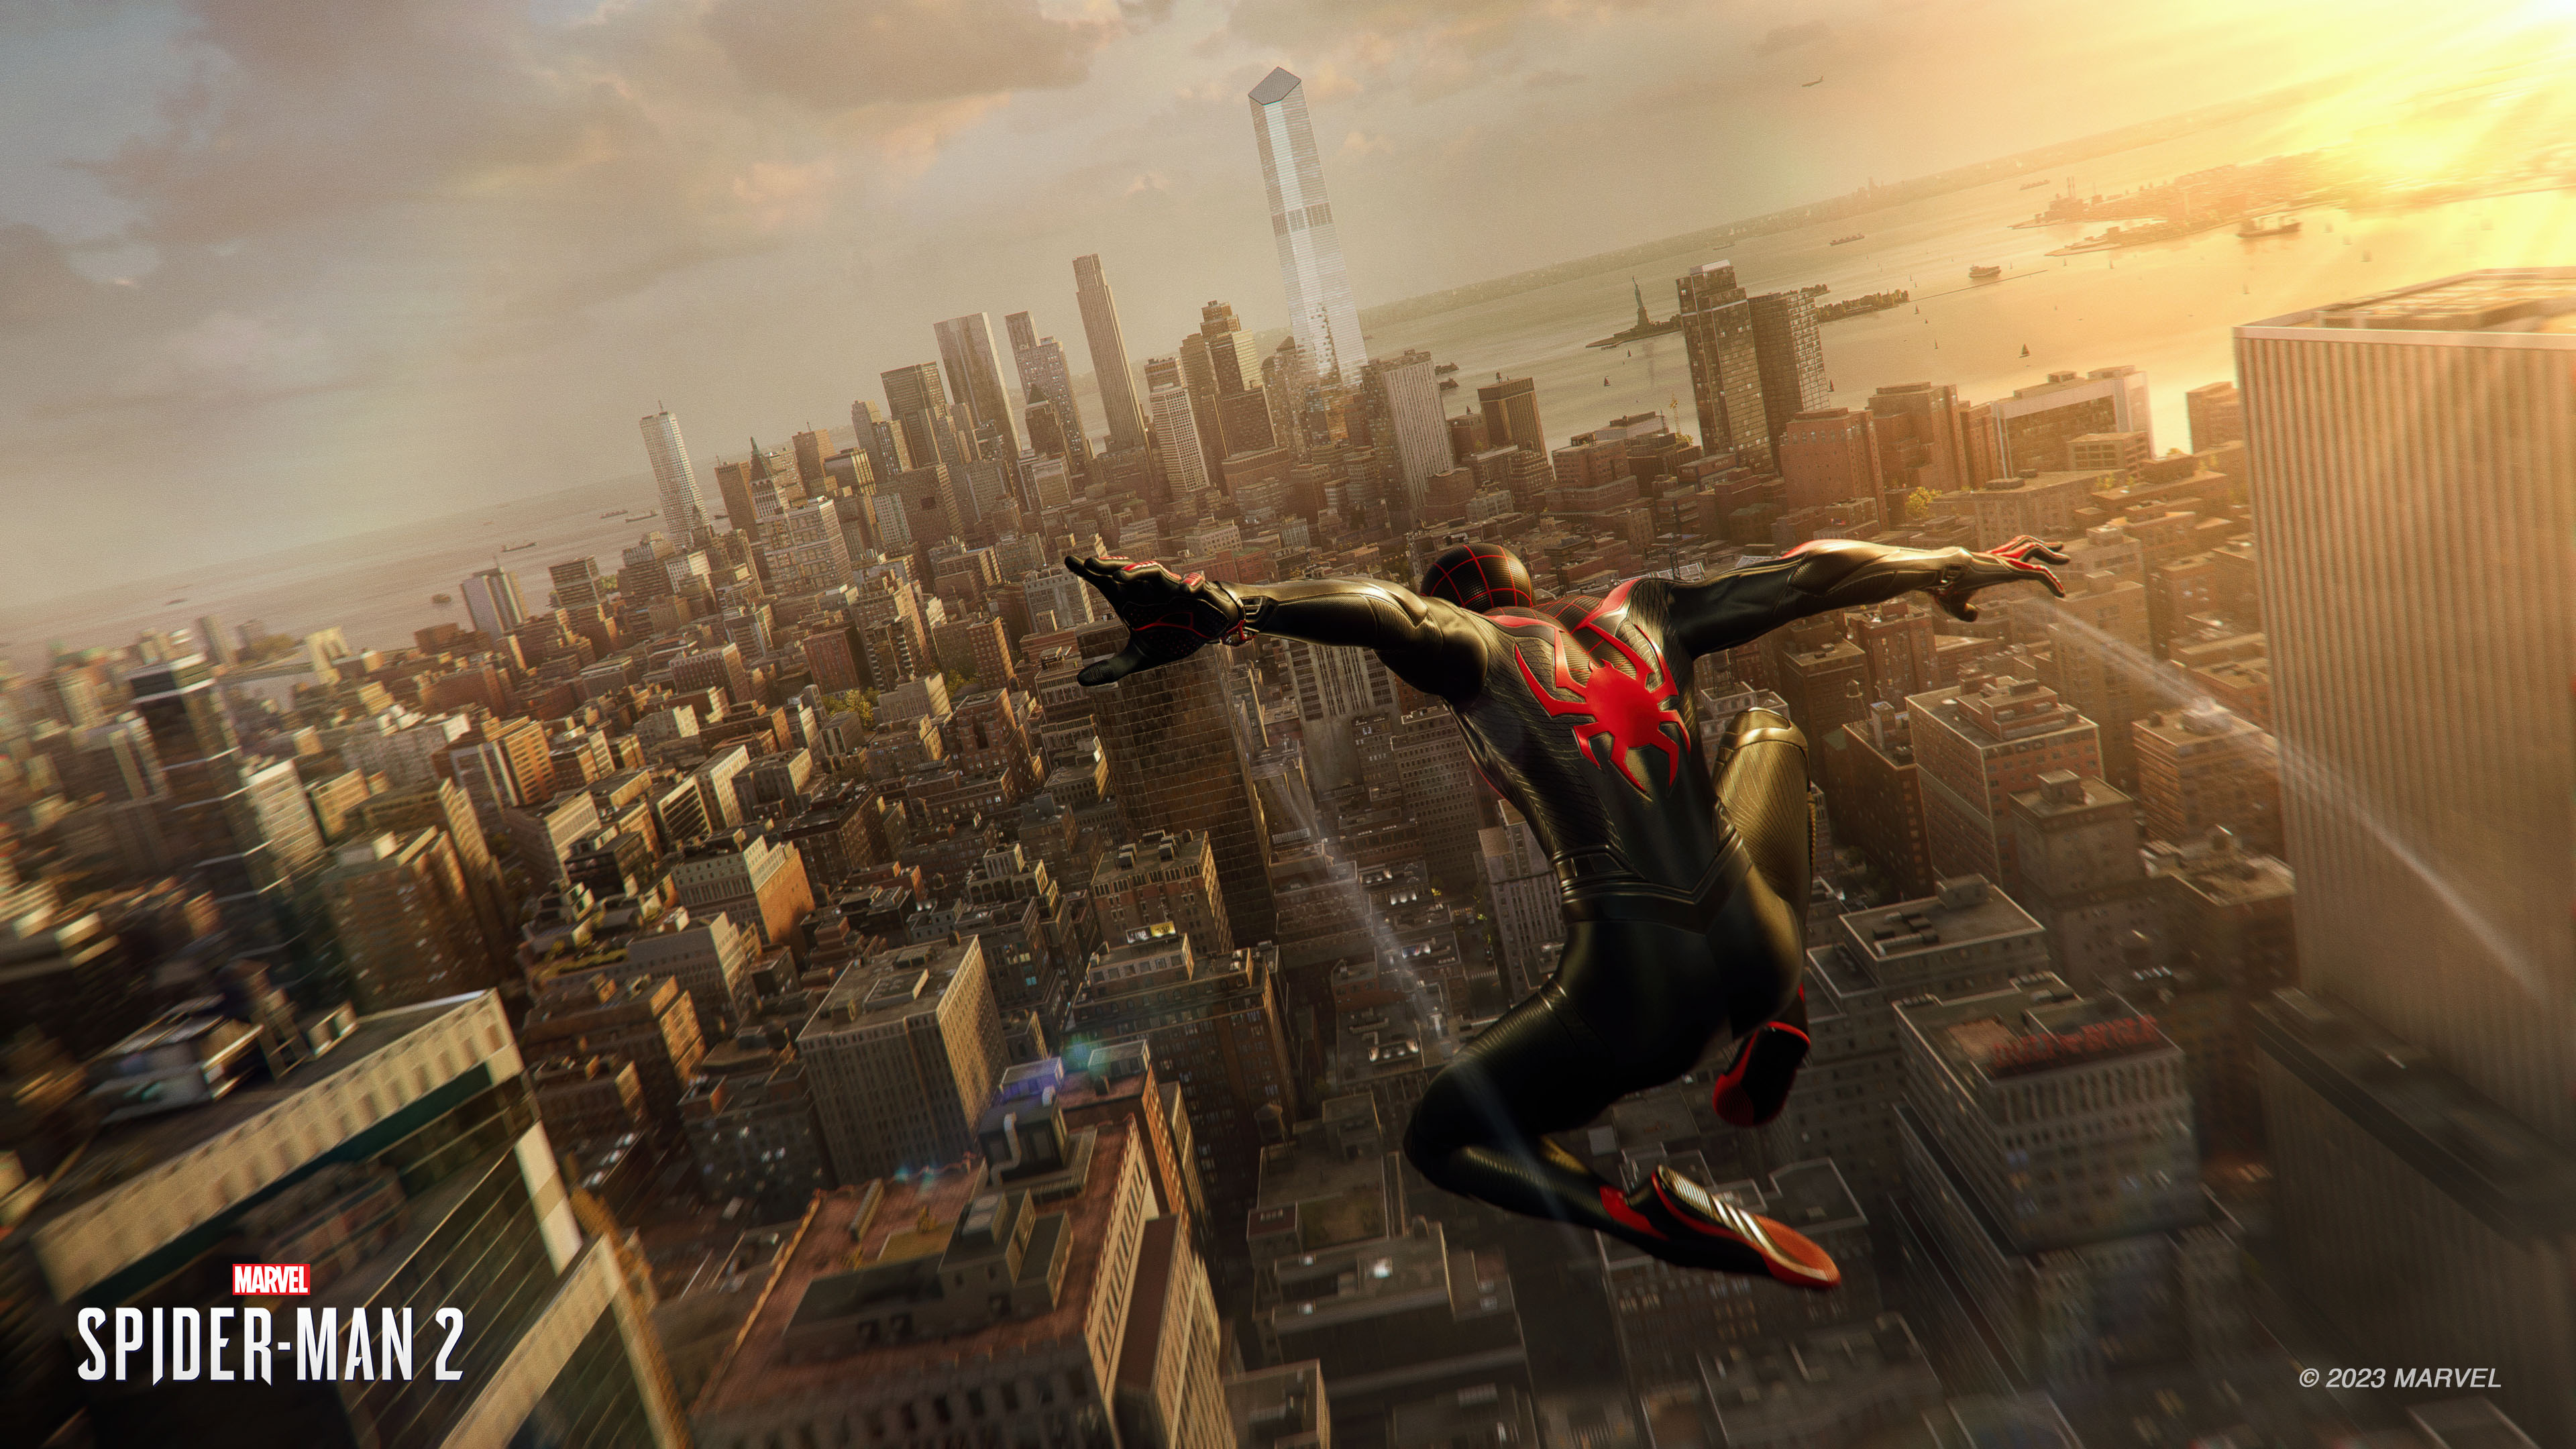 9/15 Restricted to 8 AM PT Miles leaps into the air in Marvel's Spider-Man 2.